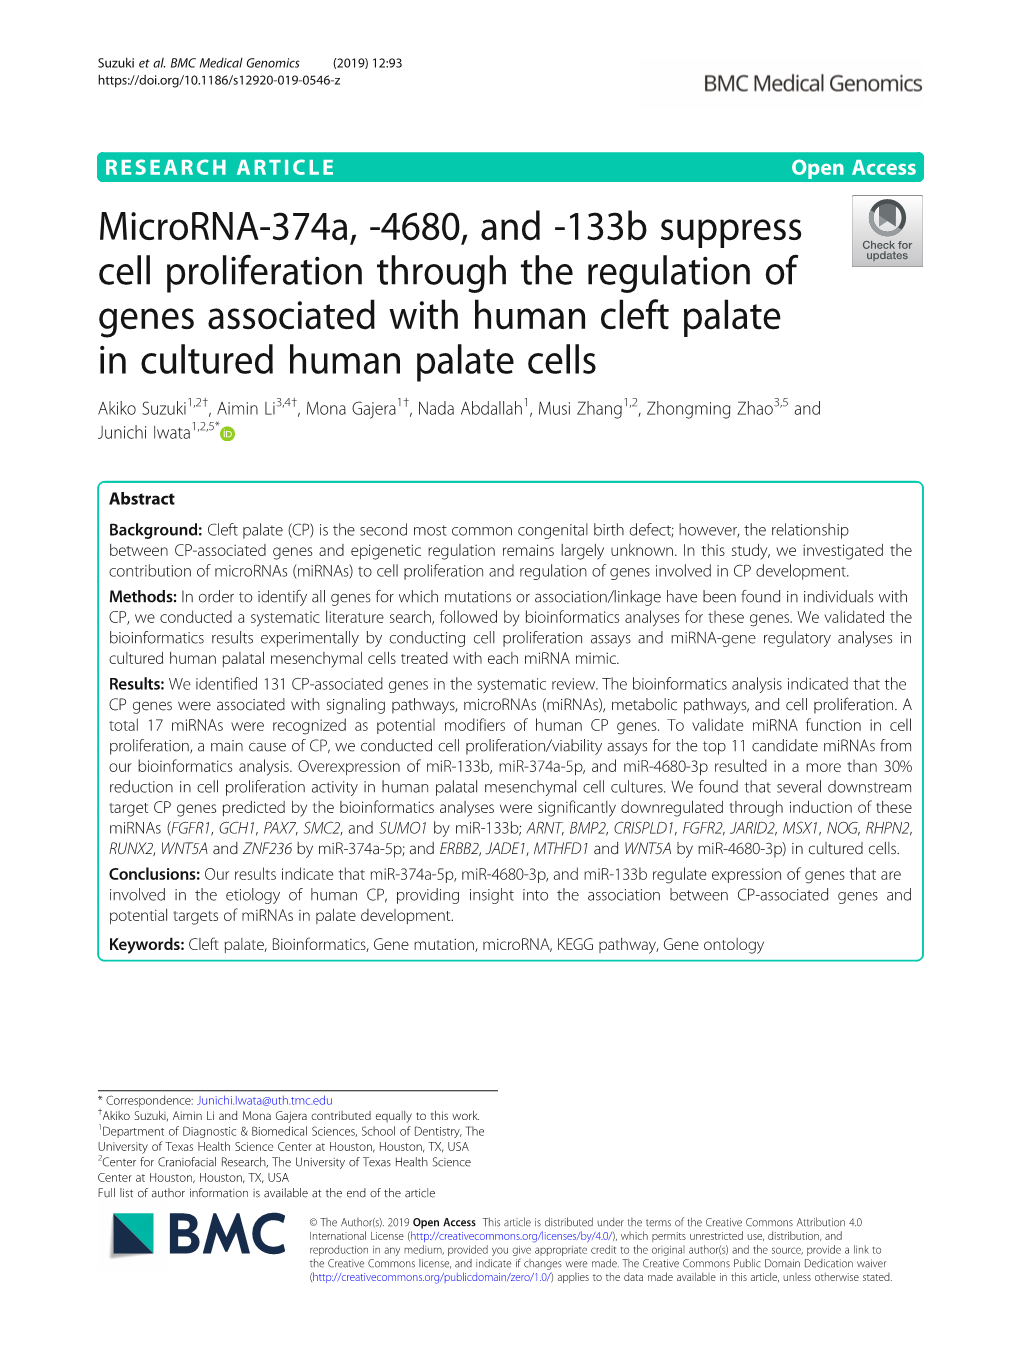 Microrna-374A, -4680, and -133B Suppress Cell Proliferation Through the Regulation of Genes Associated with Human Cleft Palate I